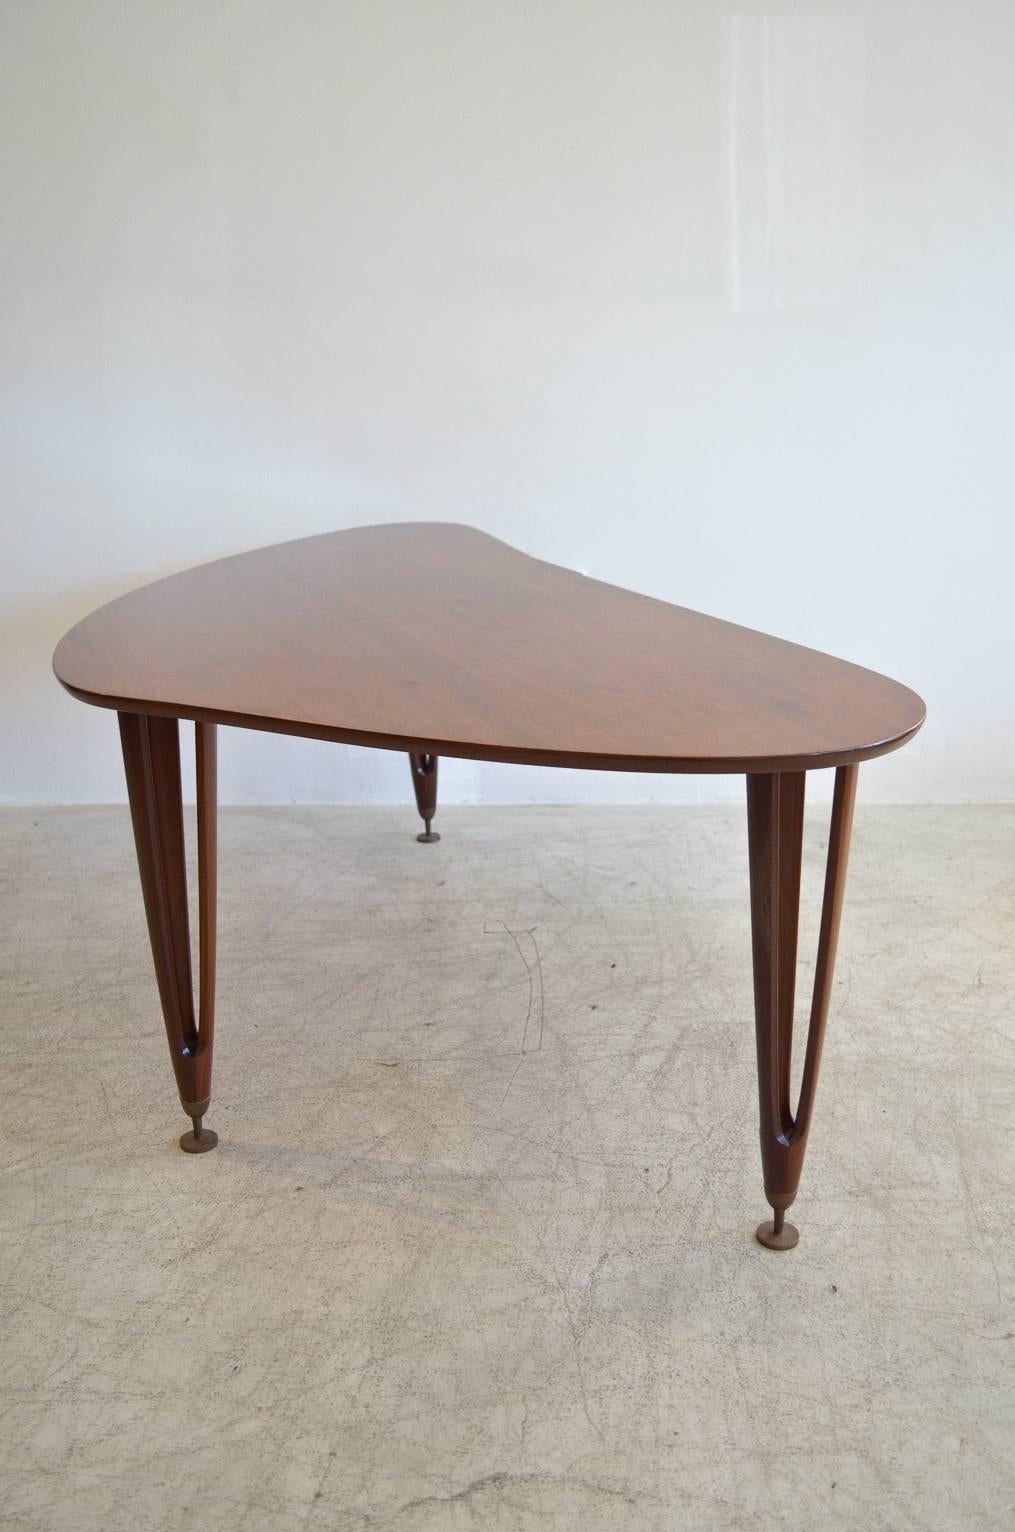 Walnut boomerang coffee table with sculpted legs, tipped in adjustable brass leveling legs. Hairpin walnut sculpted tripod legs. Made by BC Mobler of Denmark.

Excellent vintage condition with hardly any wear.  Available to see in our Modern Vault